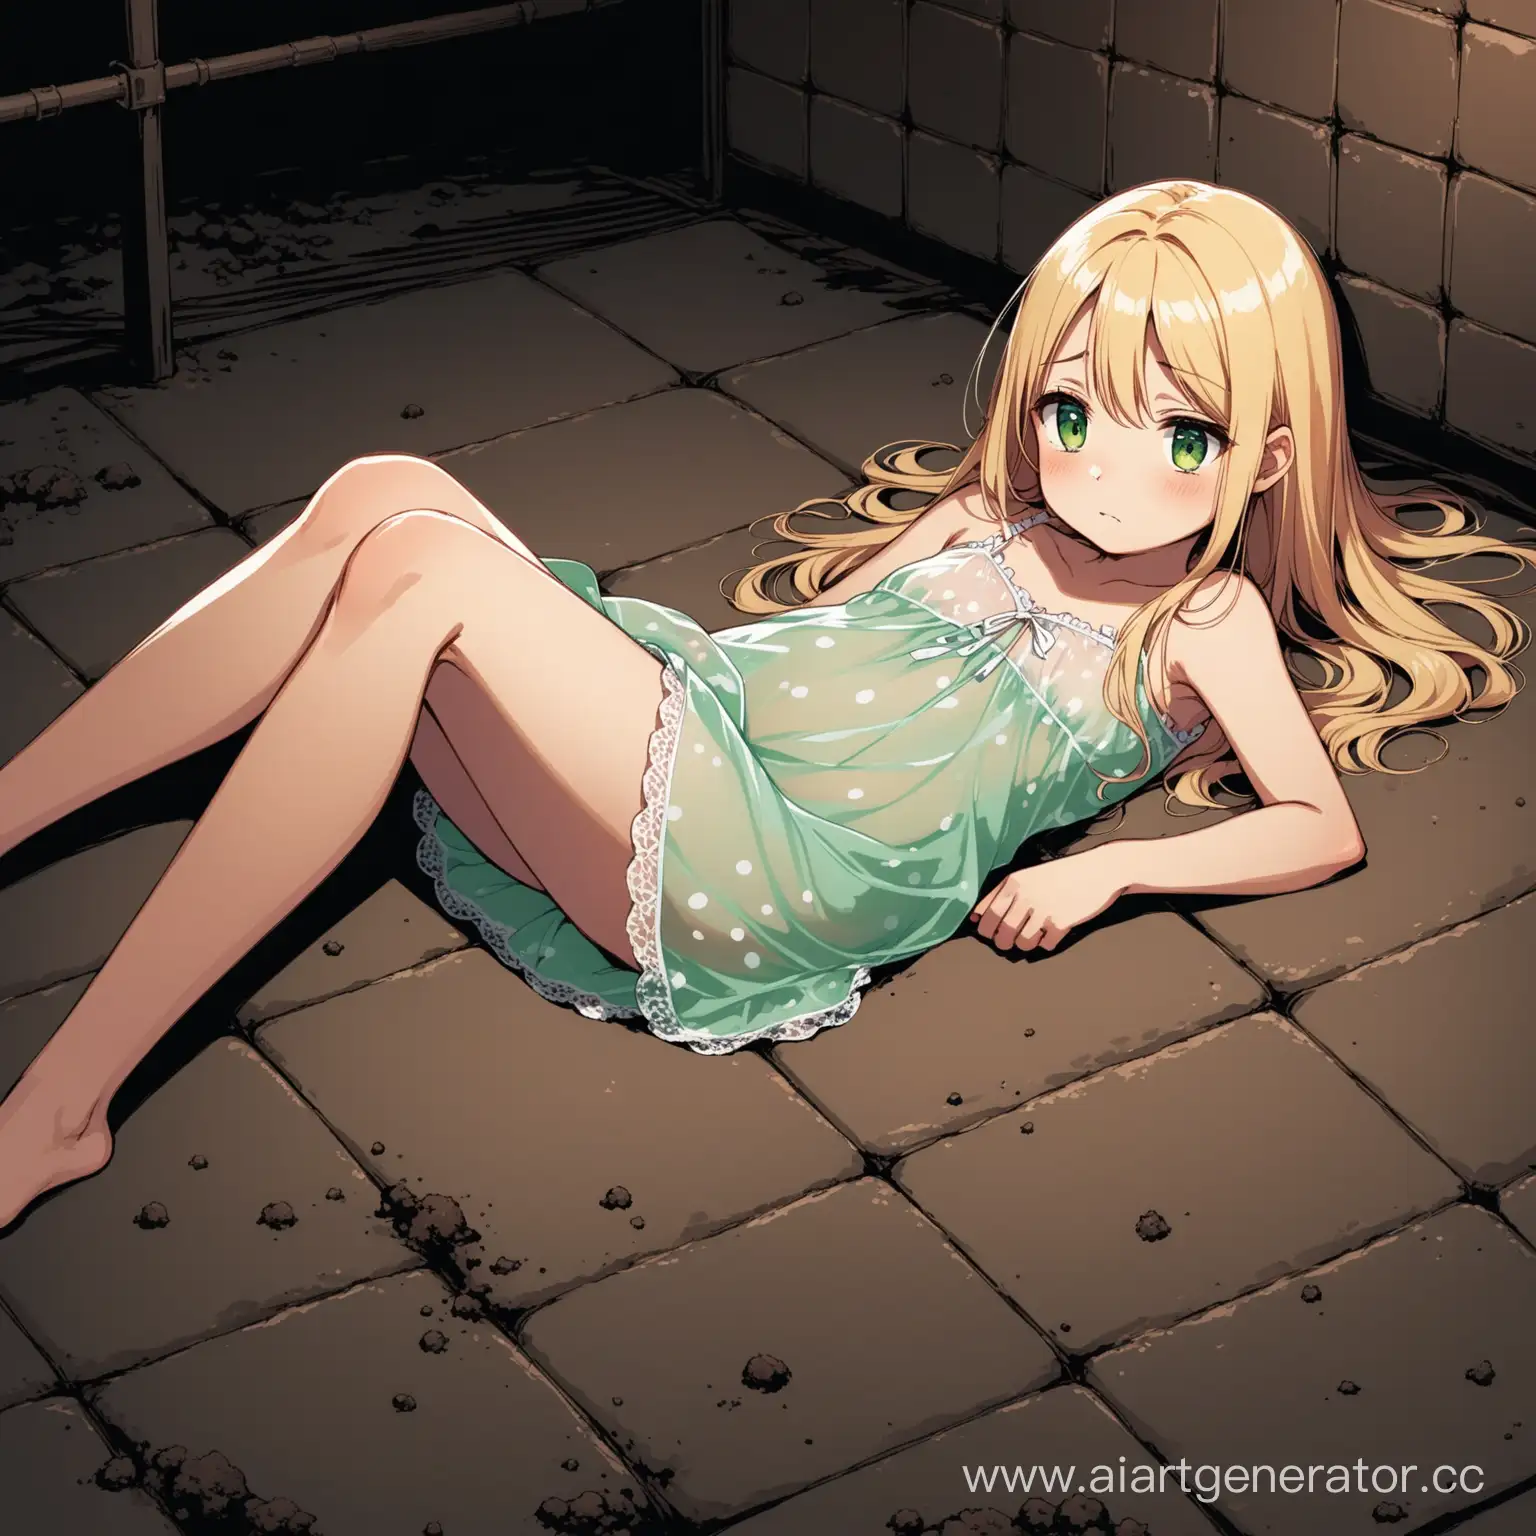 a short thin girl, blonde with long hair, green eyes, she is wearing a semi-transparent short nightgown, she is lying on a mattress in the basement, she looks sad and detached, walls of the basement were stained with dirt and dark red spots